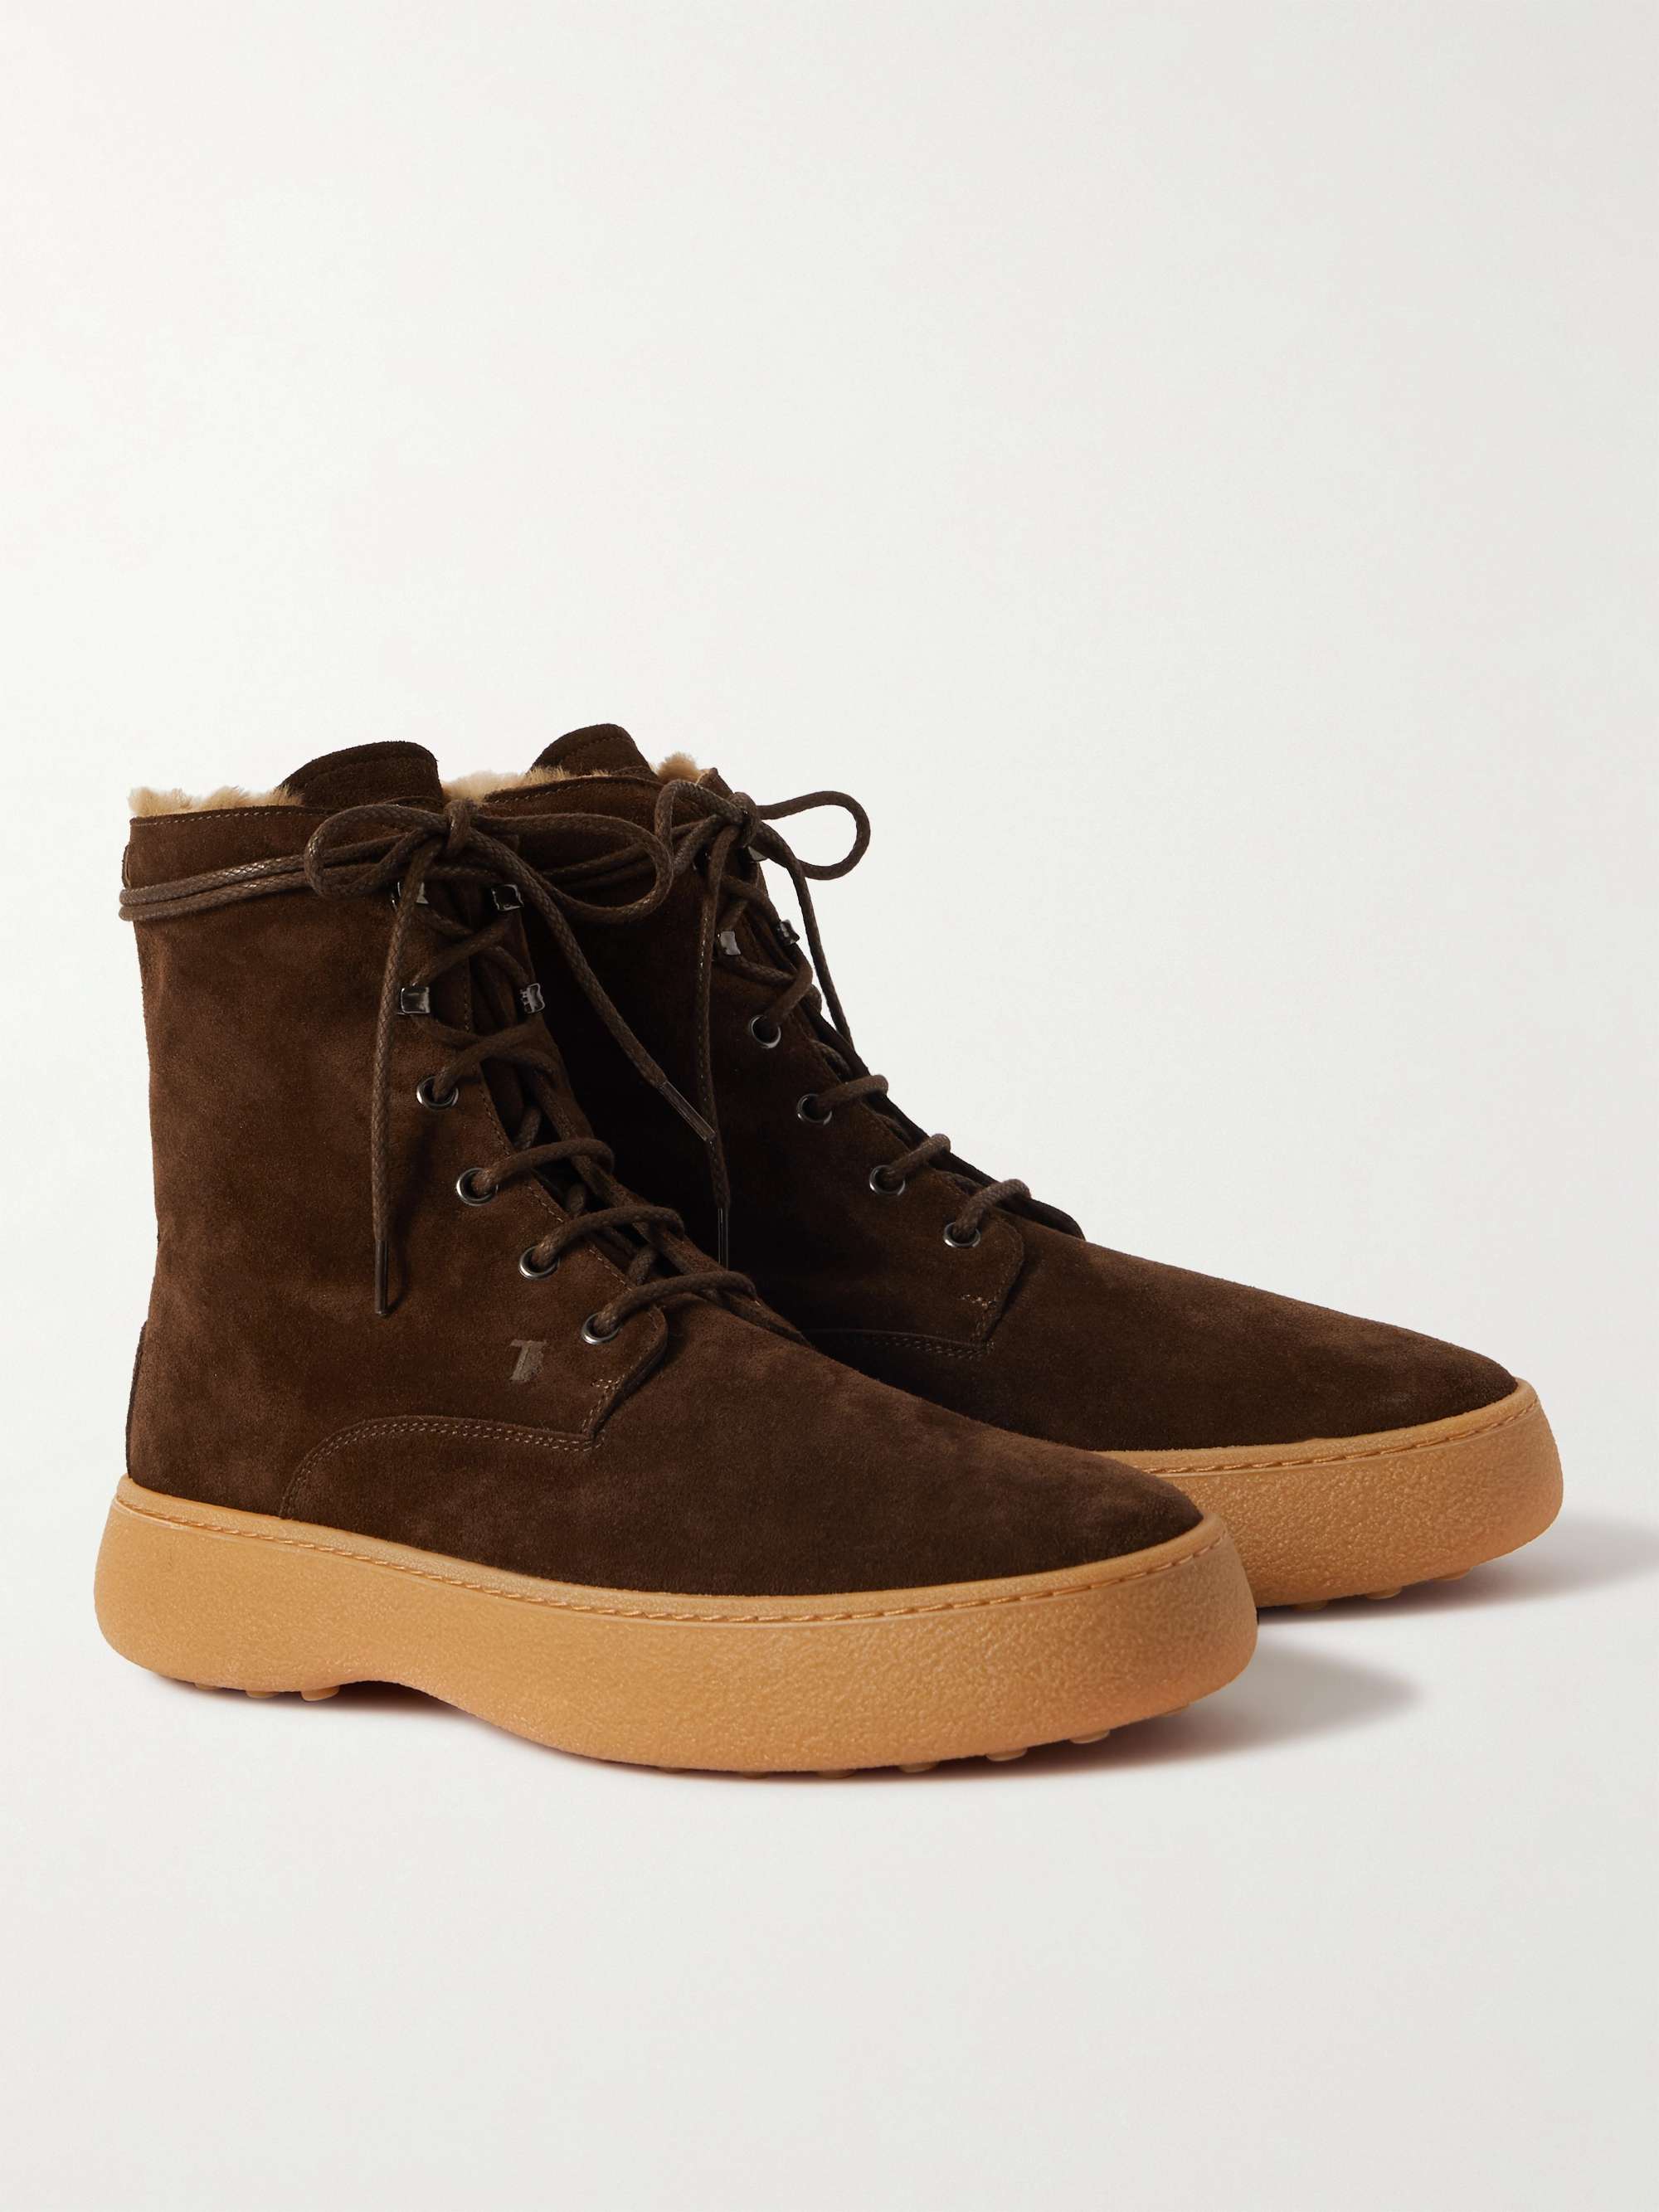 TOD'S Shearling-Lined Suede Boots